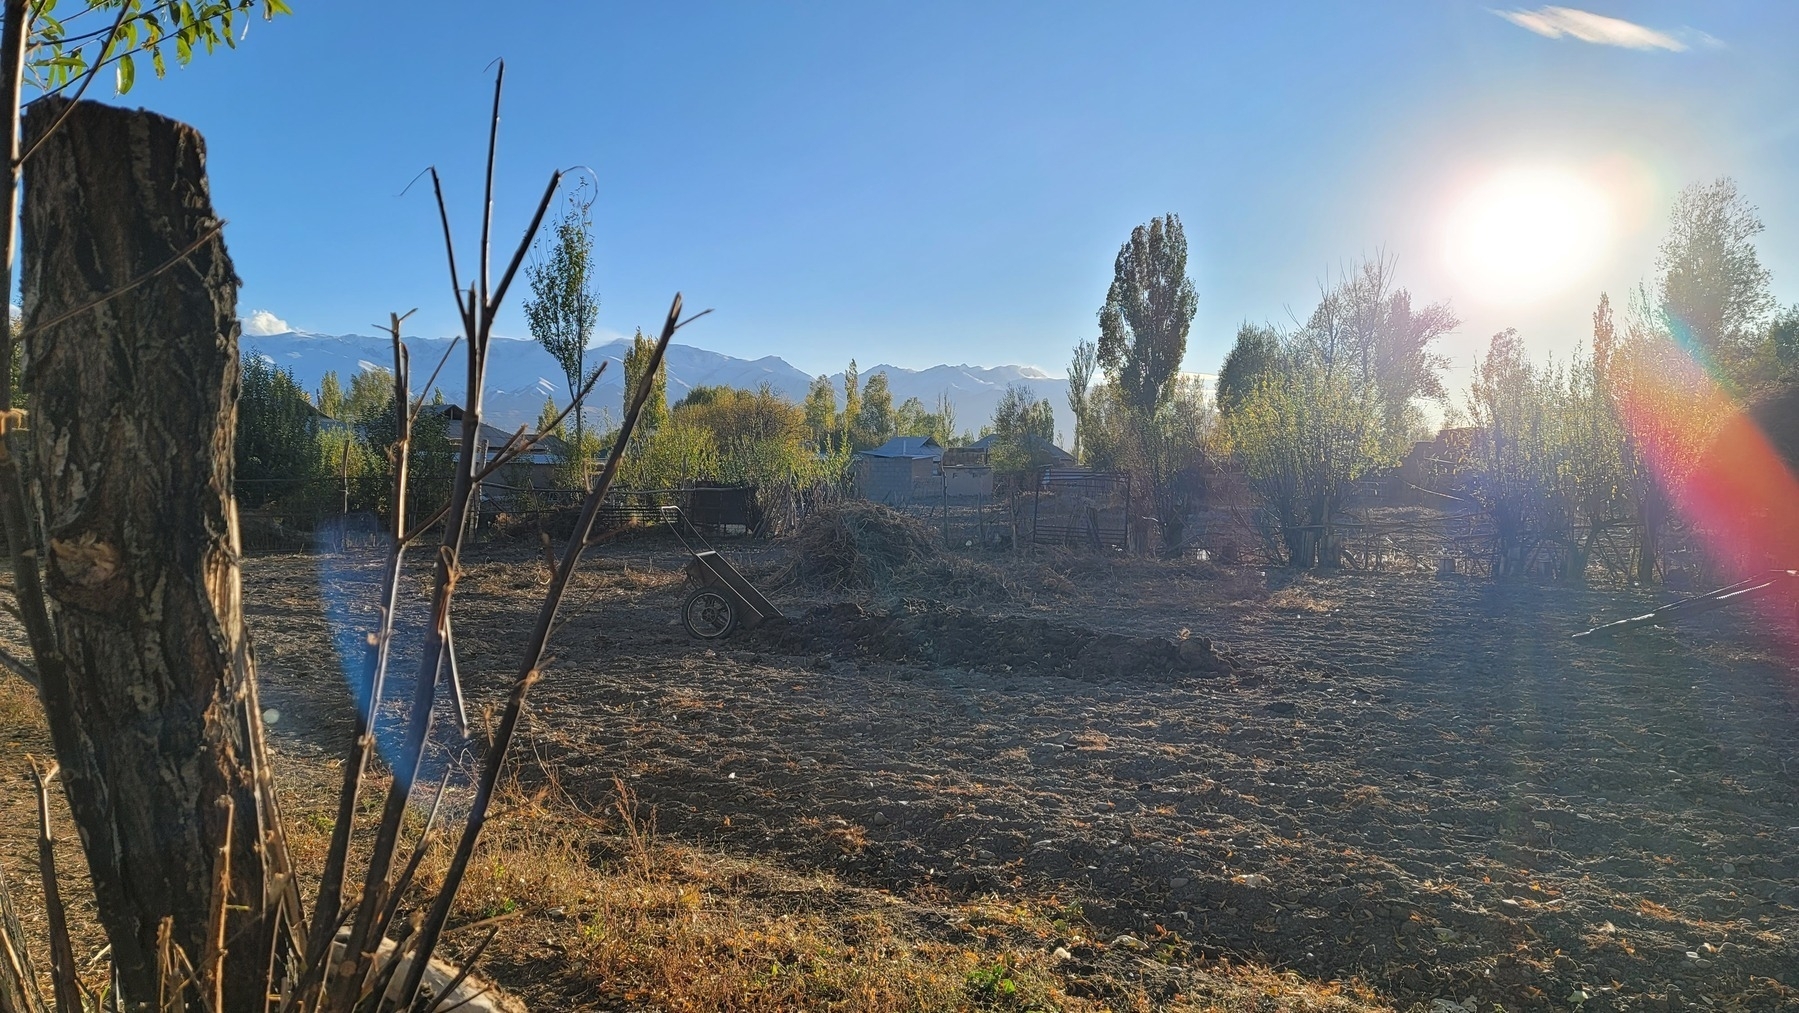 field (probably for potatoes) with a wheelbarrow, dirt pile, and hay pile, surrounded by trees, mountains in the background, and a bright sun in the sky